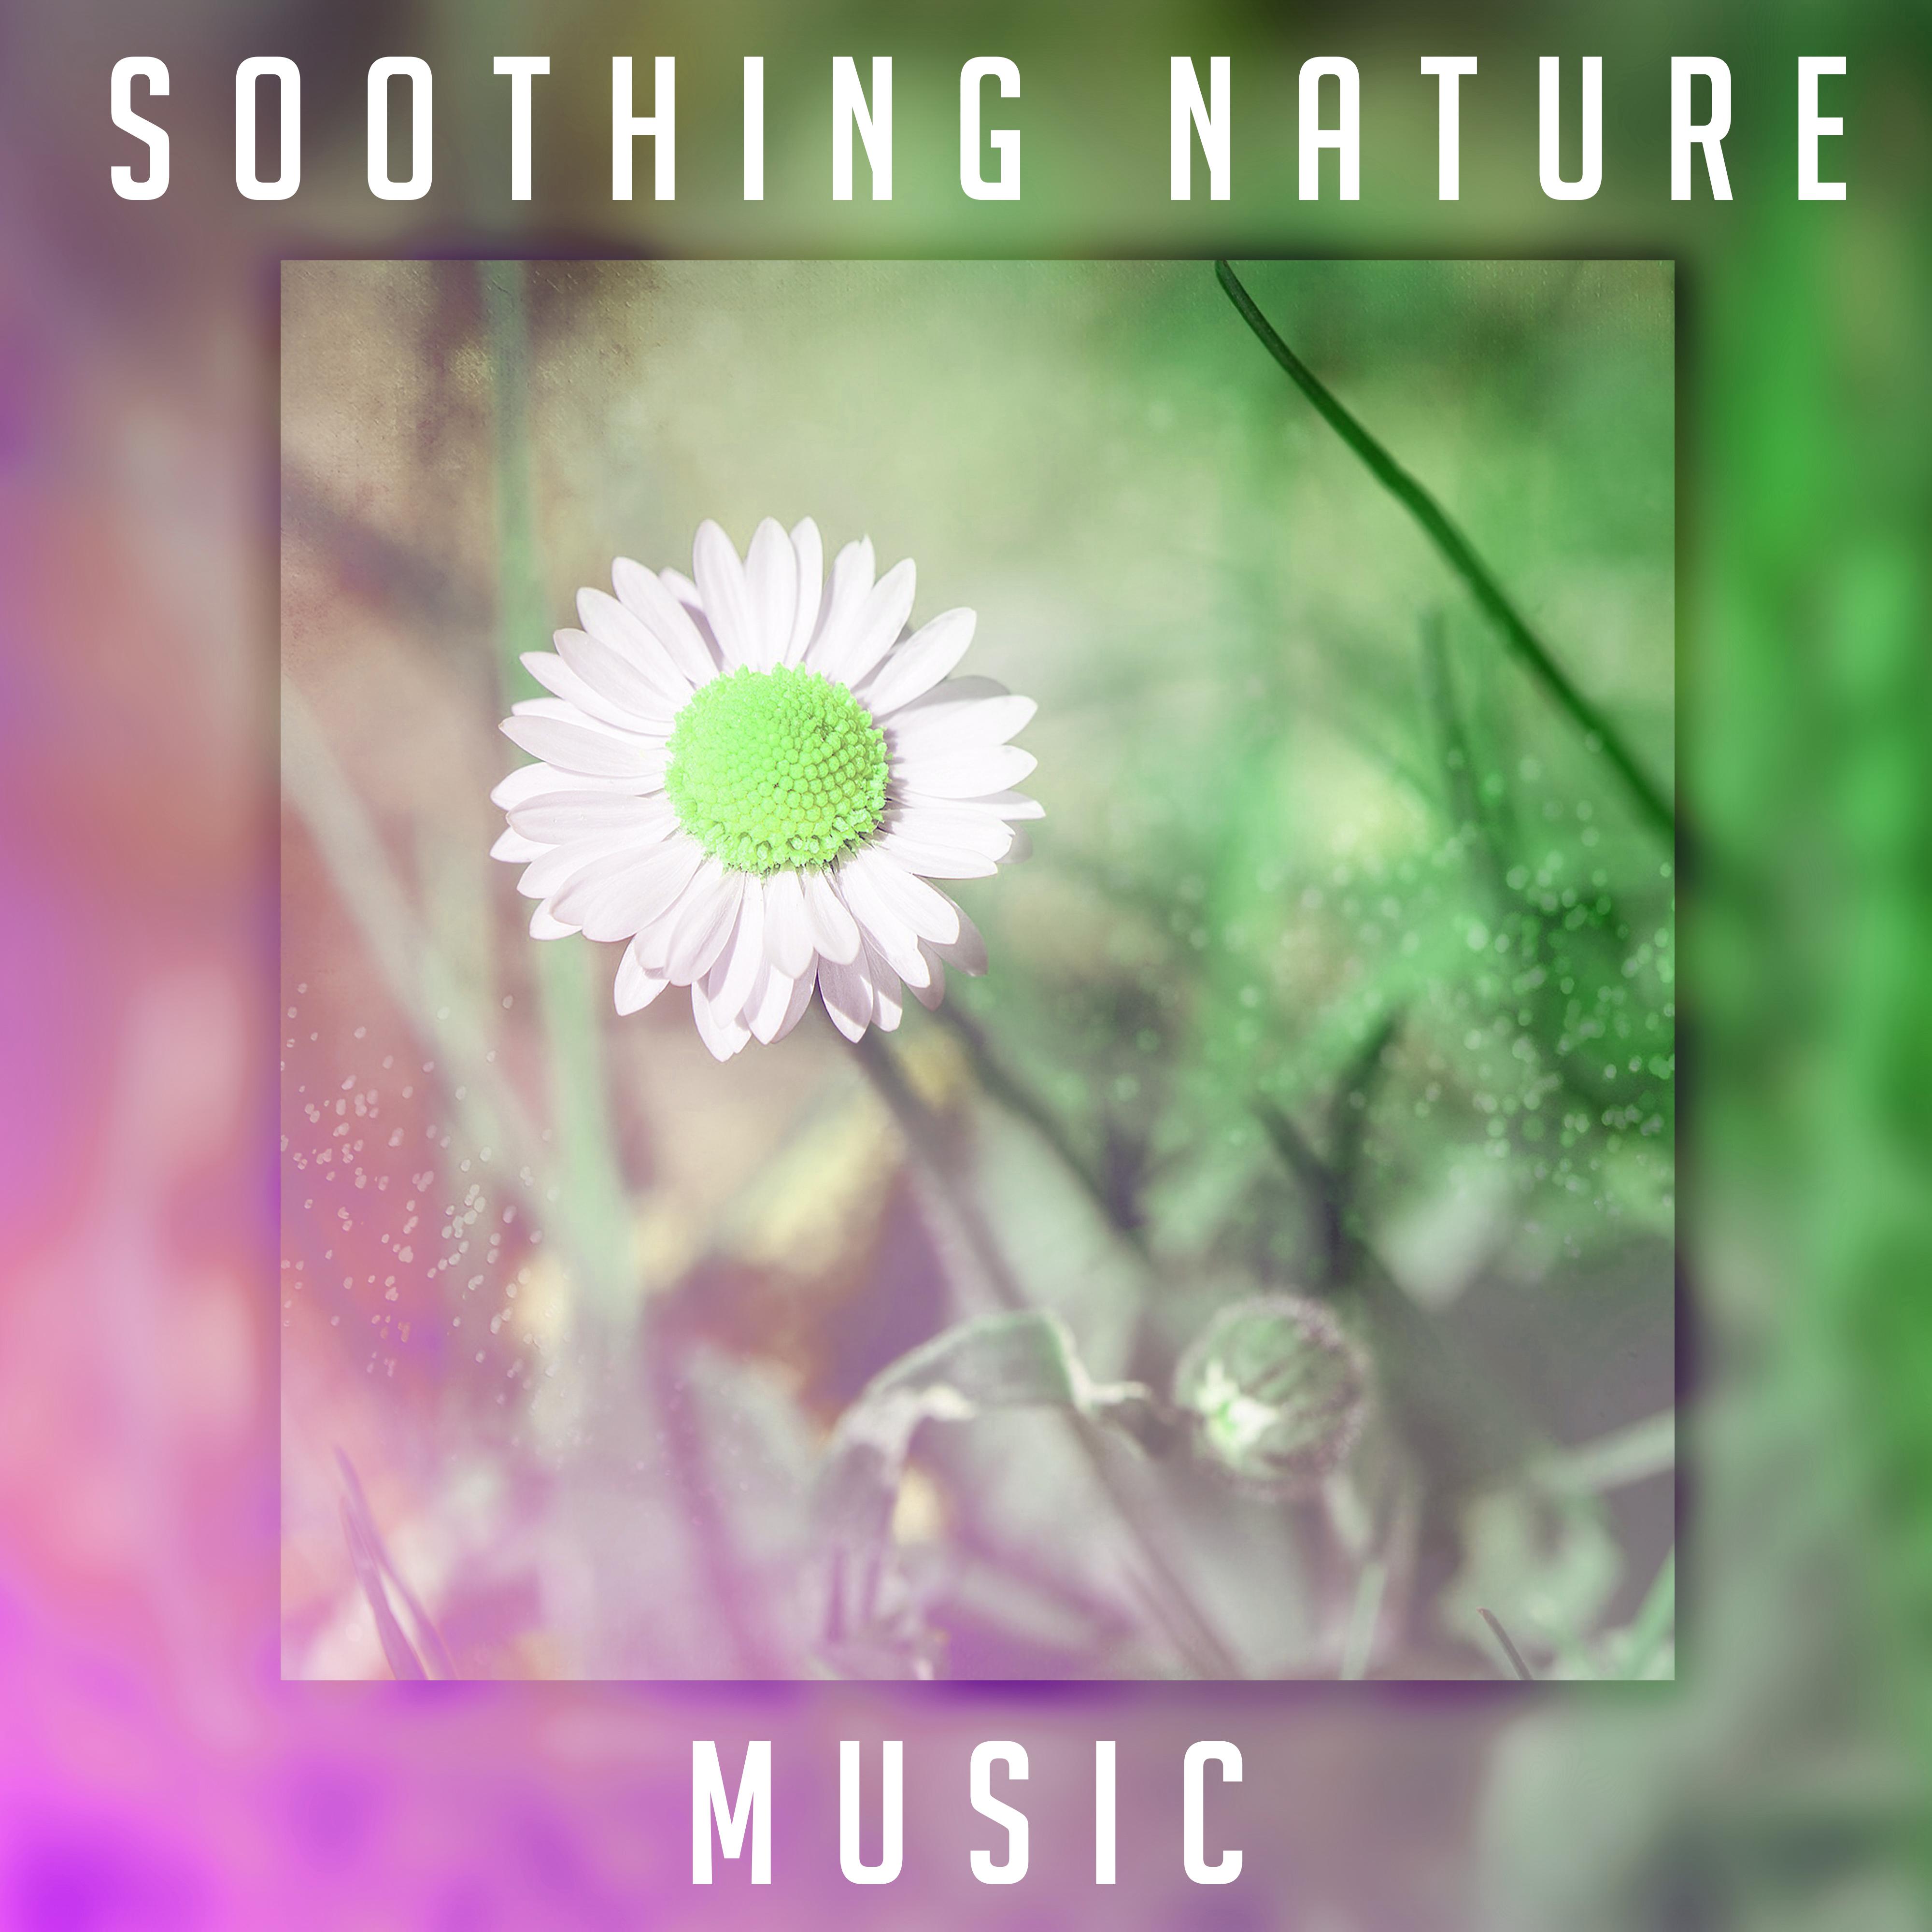 Soothing Nature Music – Calm Down & Relax, Rest with New Age Sounds, Nature Waves, Healing Therapy